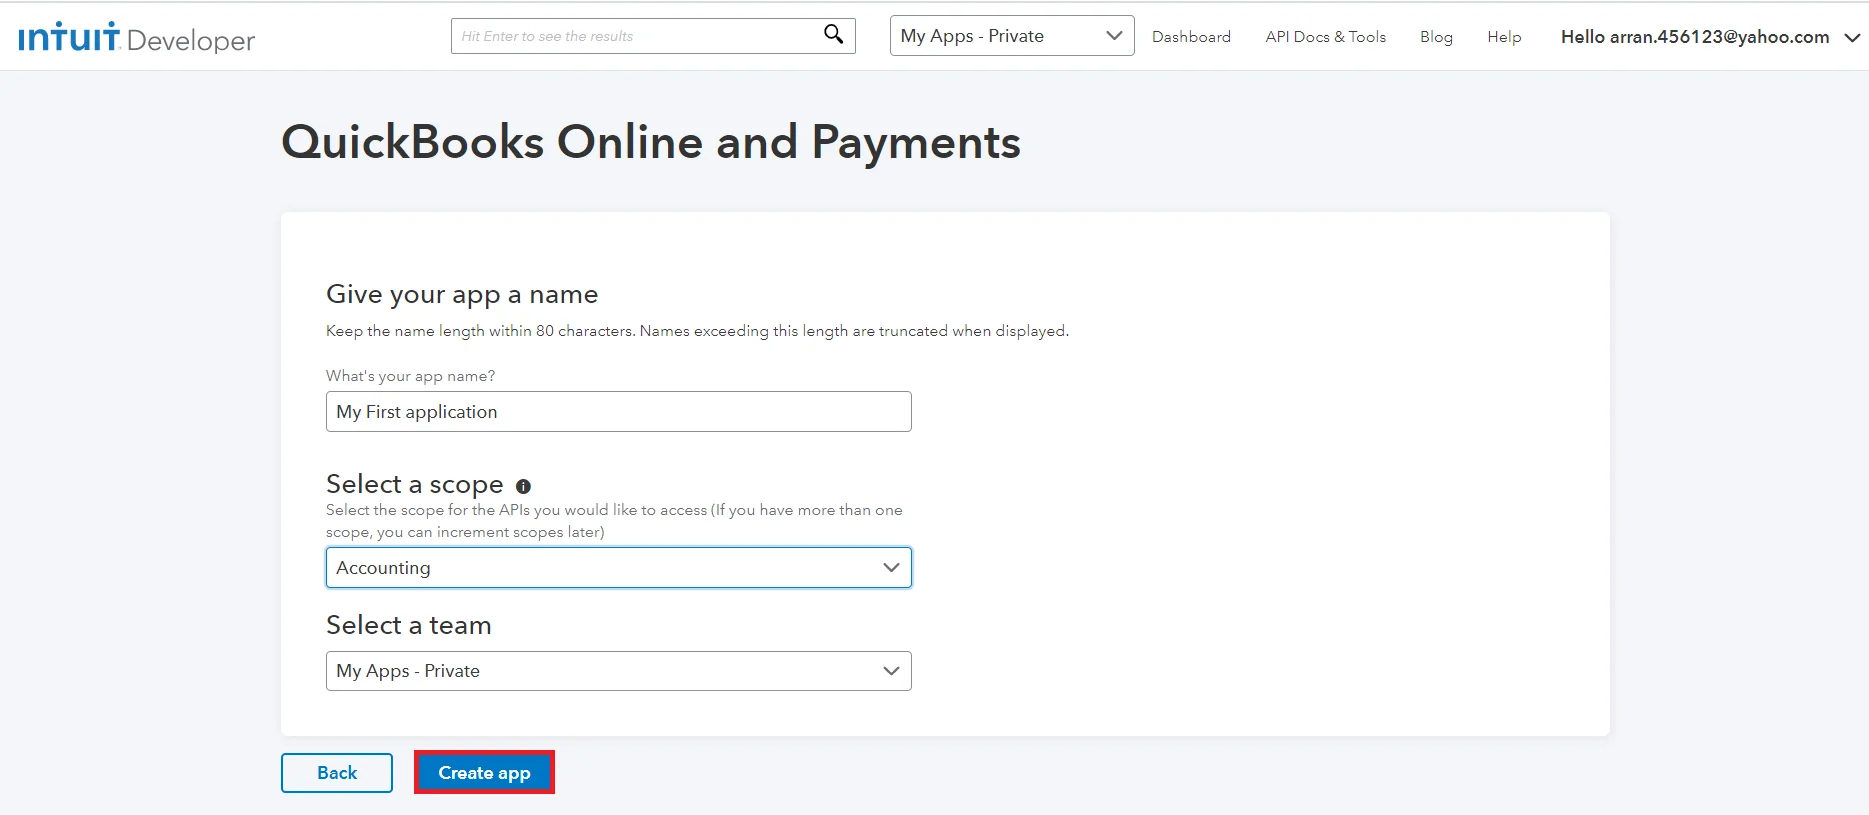 intuit single sign-on sso : give details